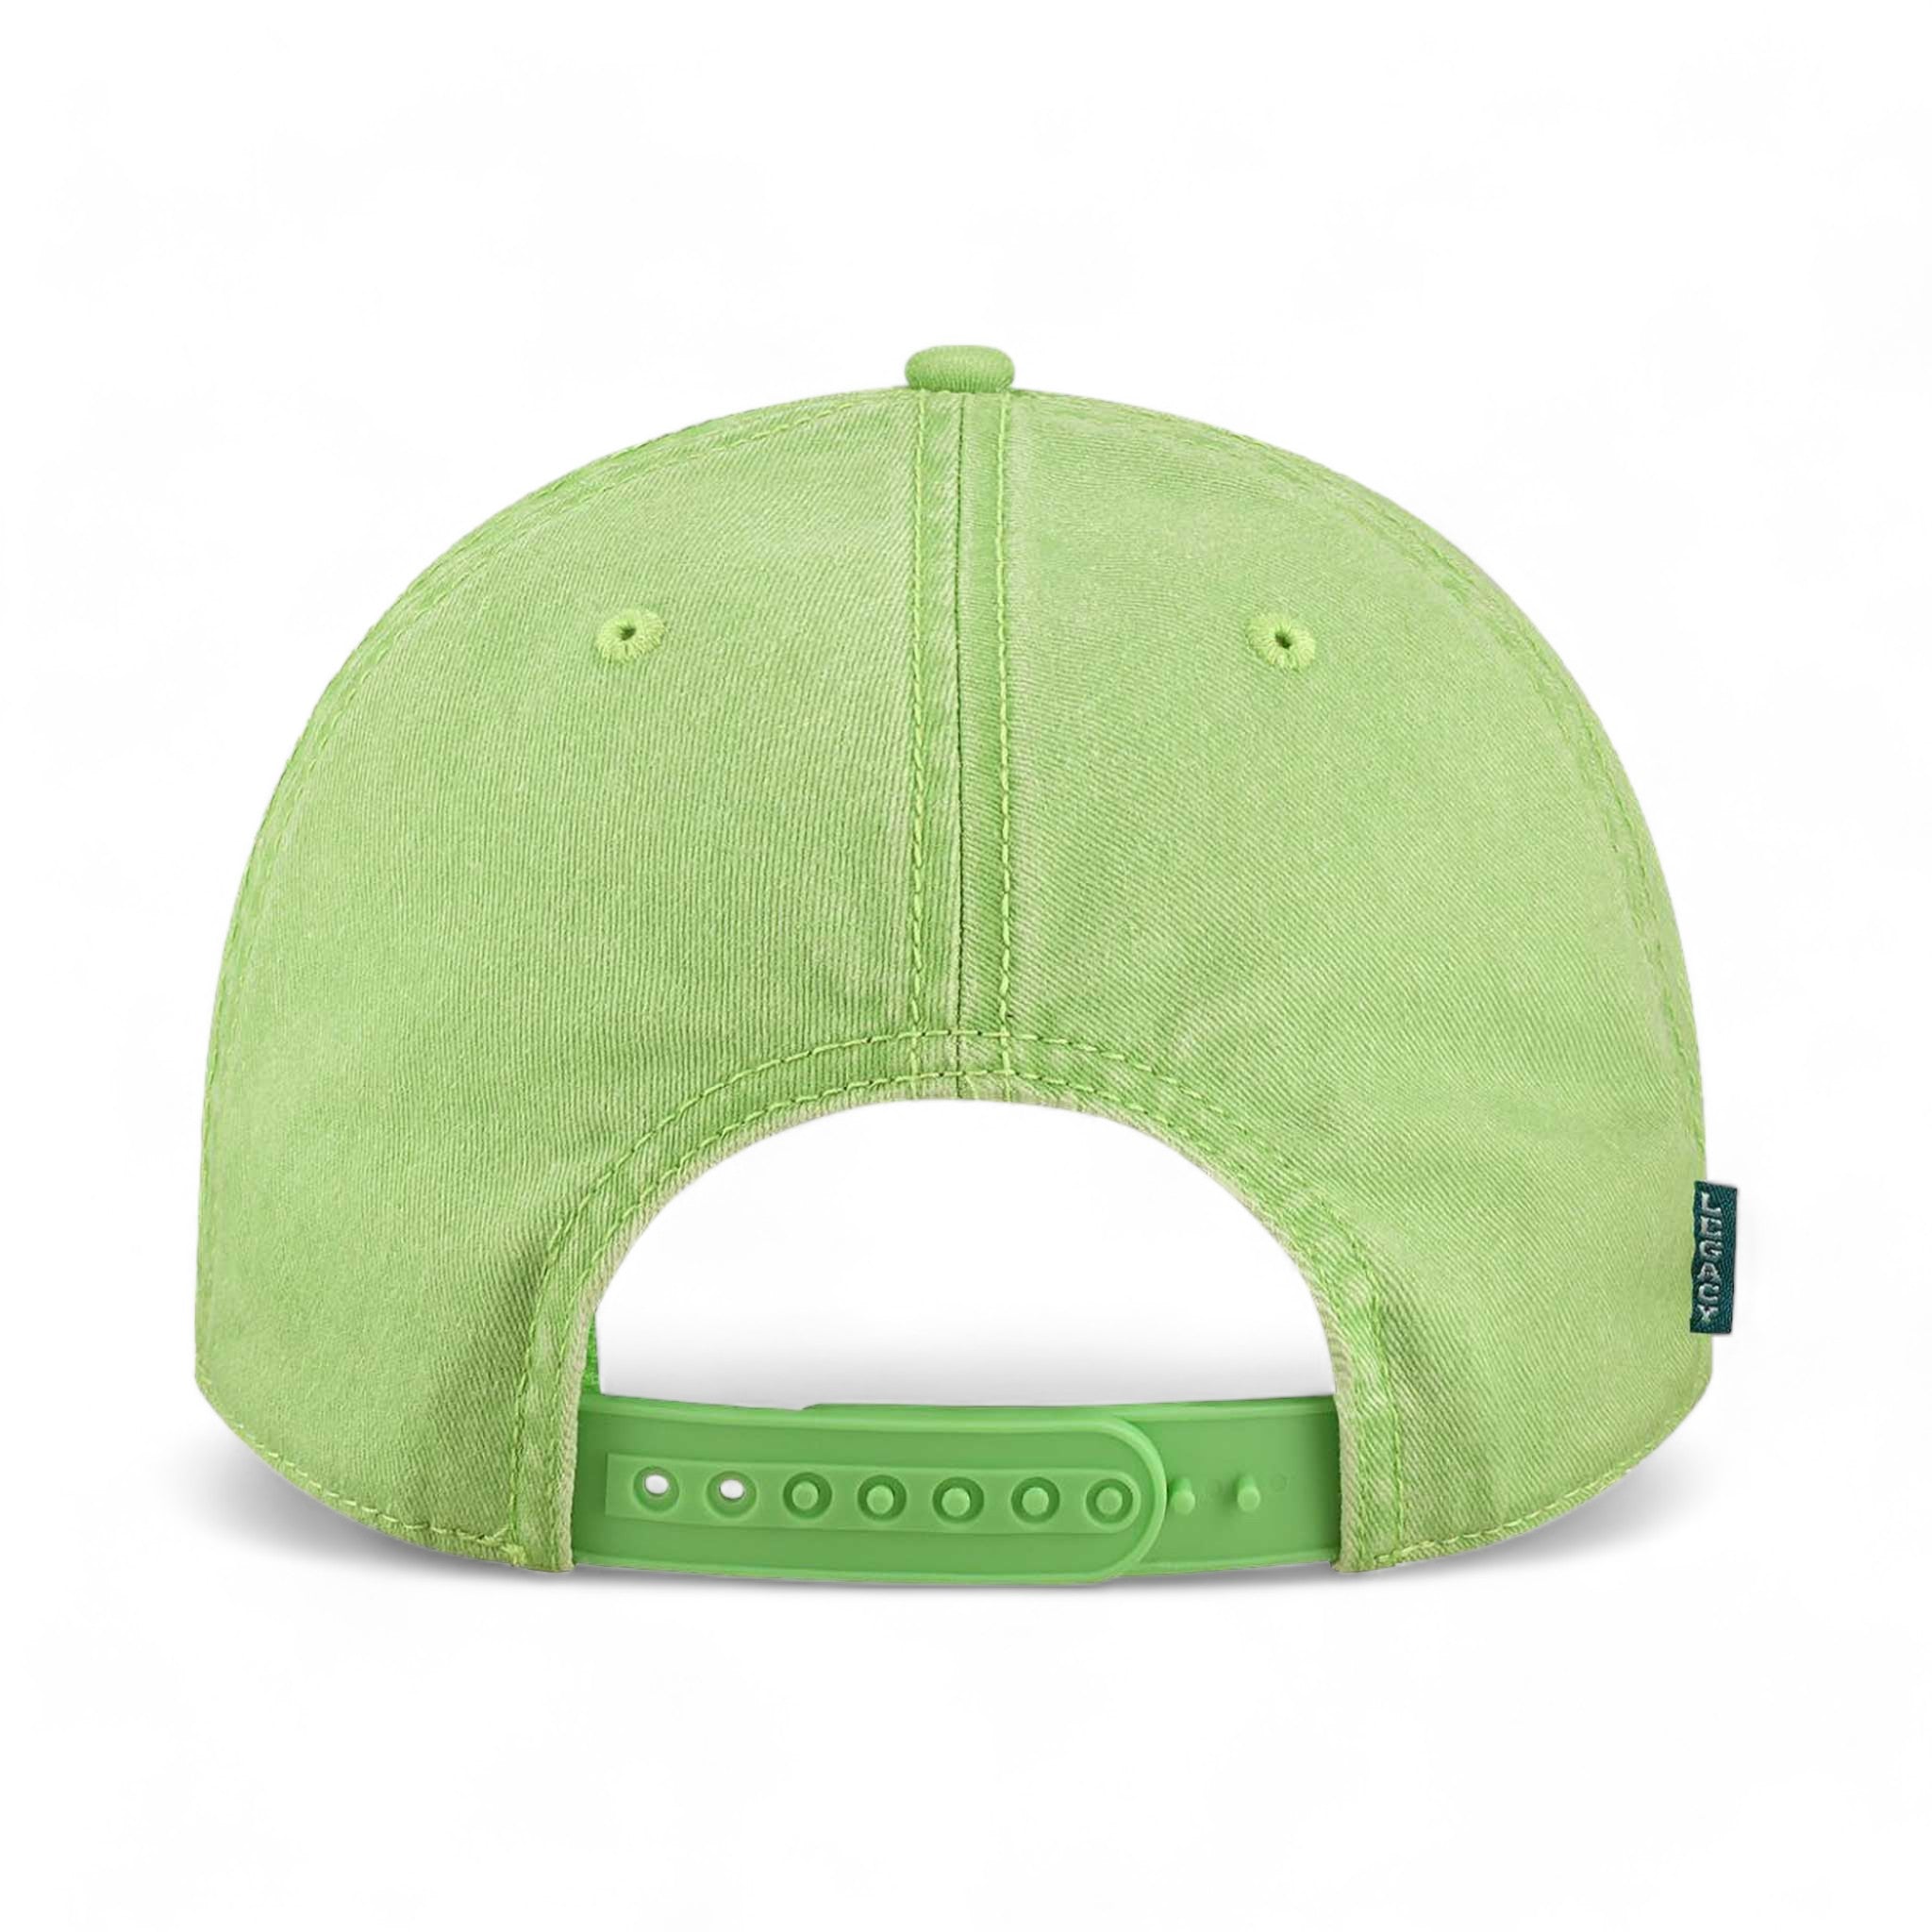 Back view of LEGACY SKULLY custom hat in lime green